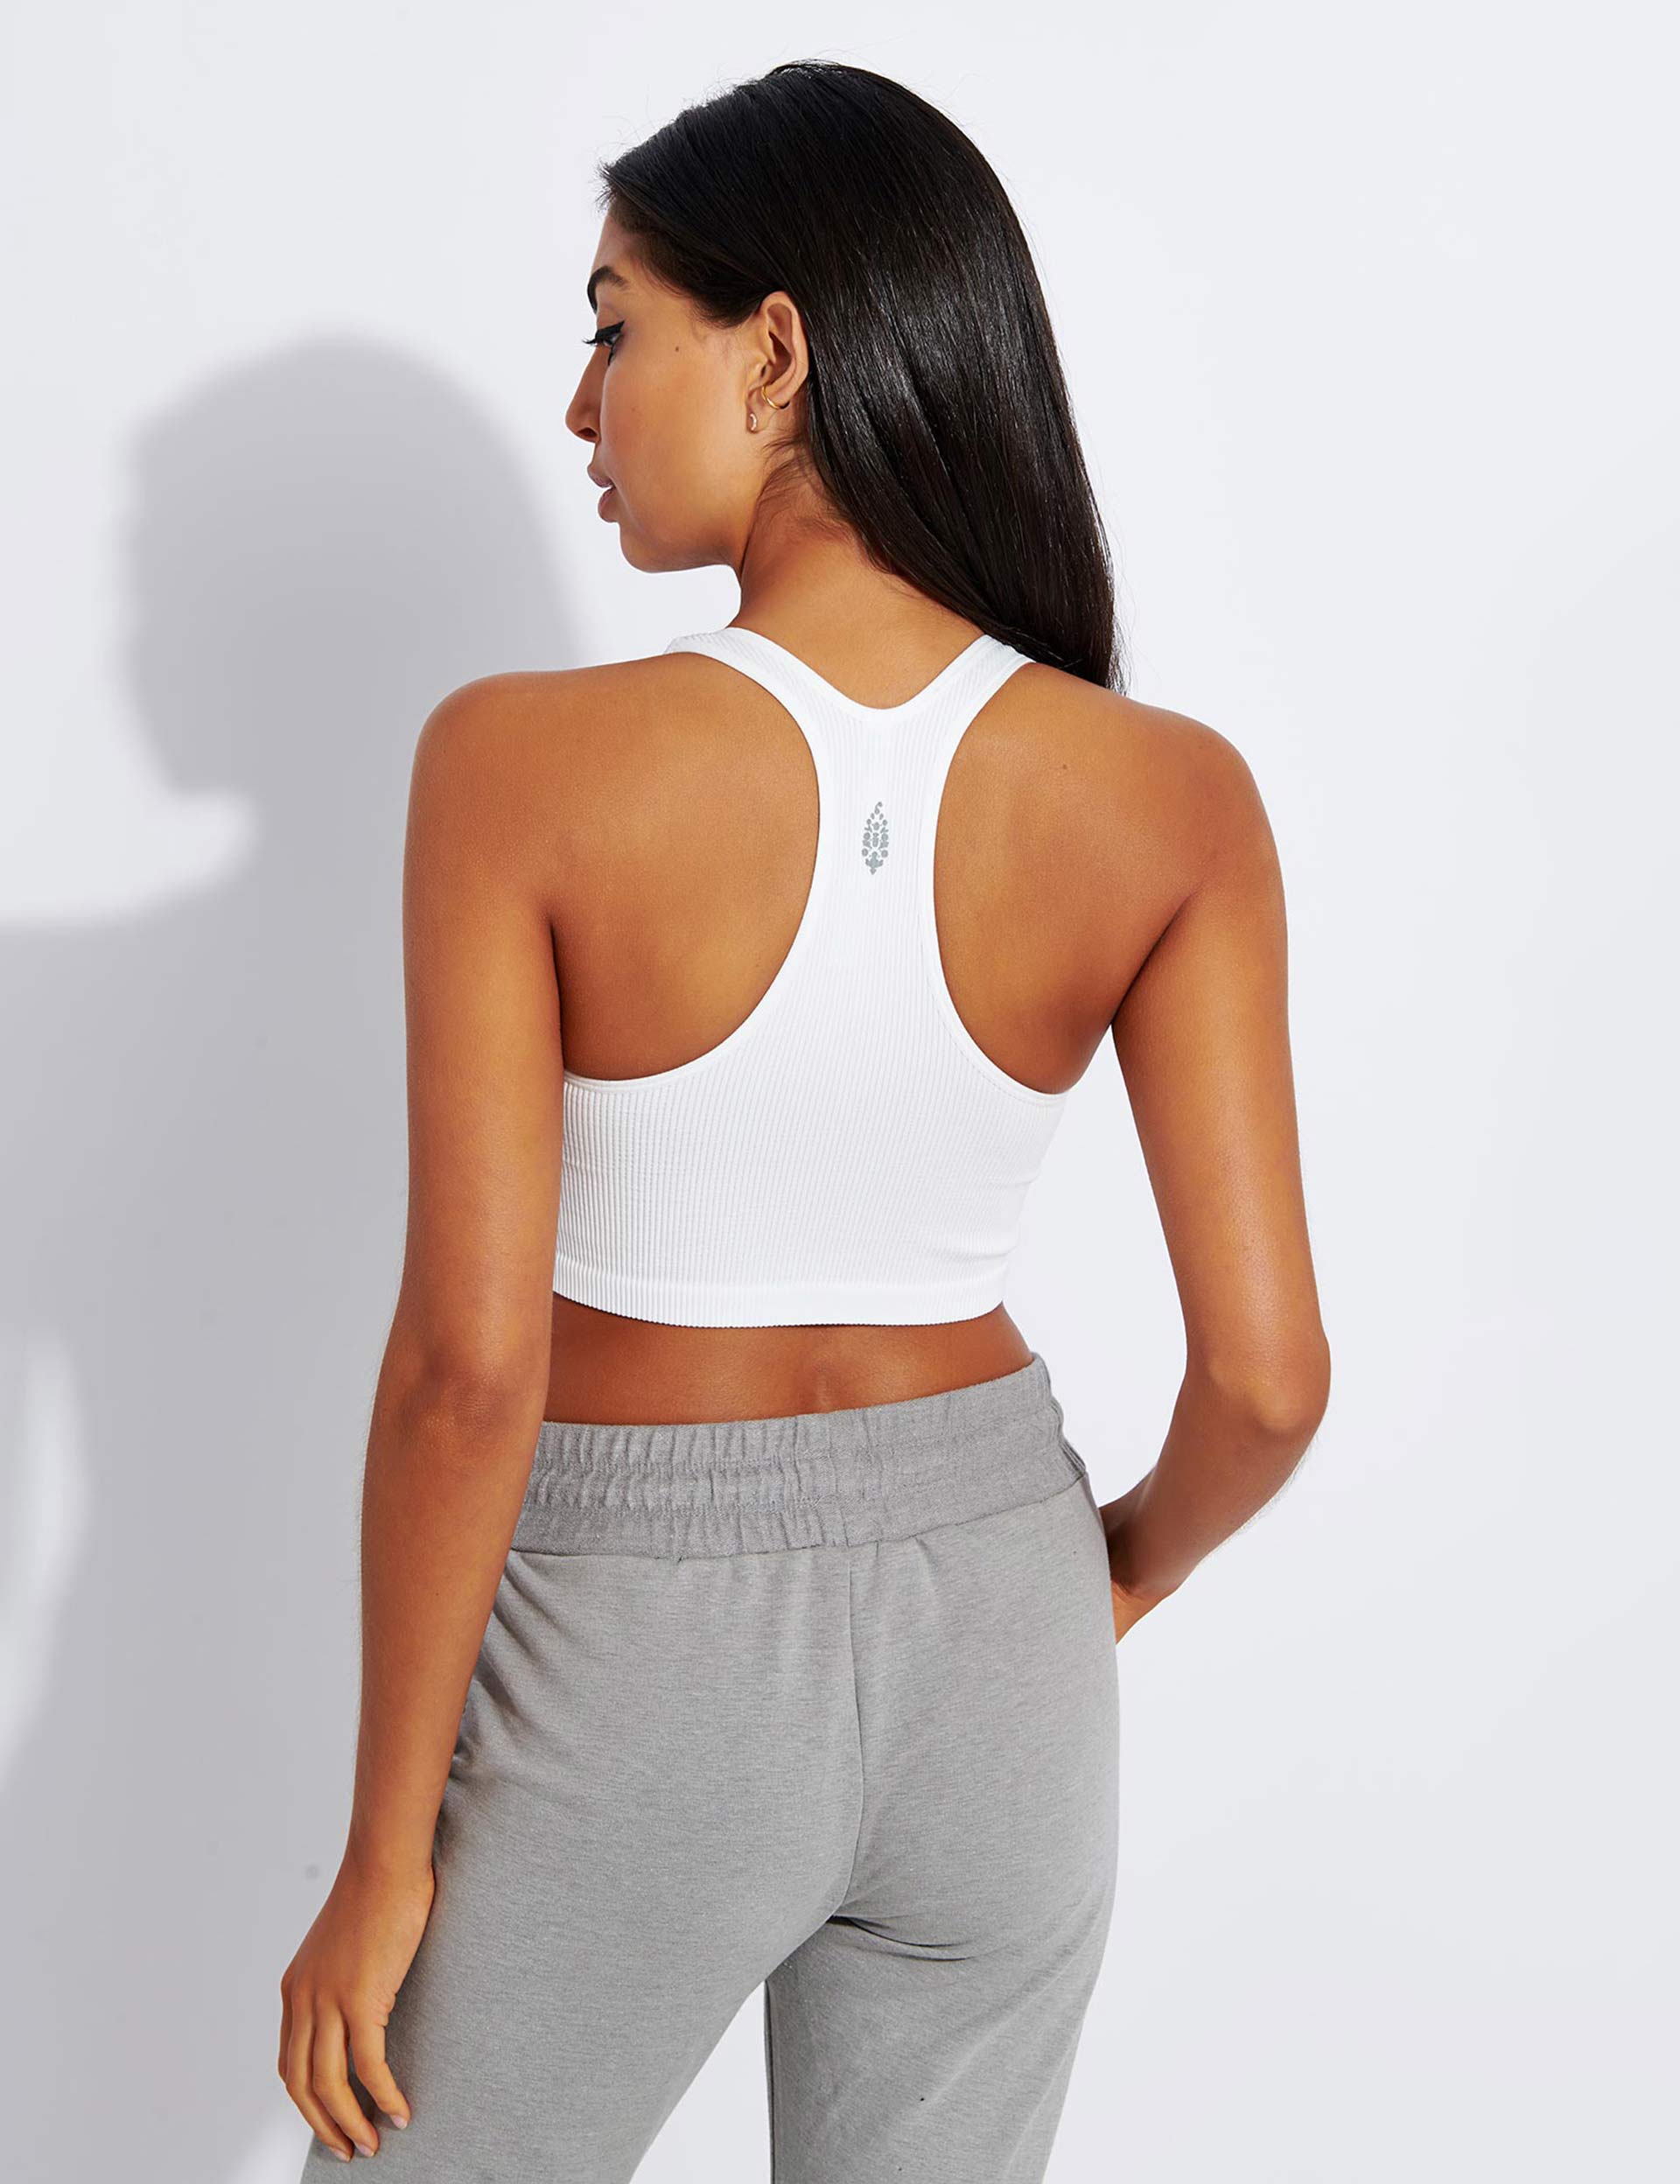 Free People Movement white sports bra in navy